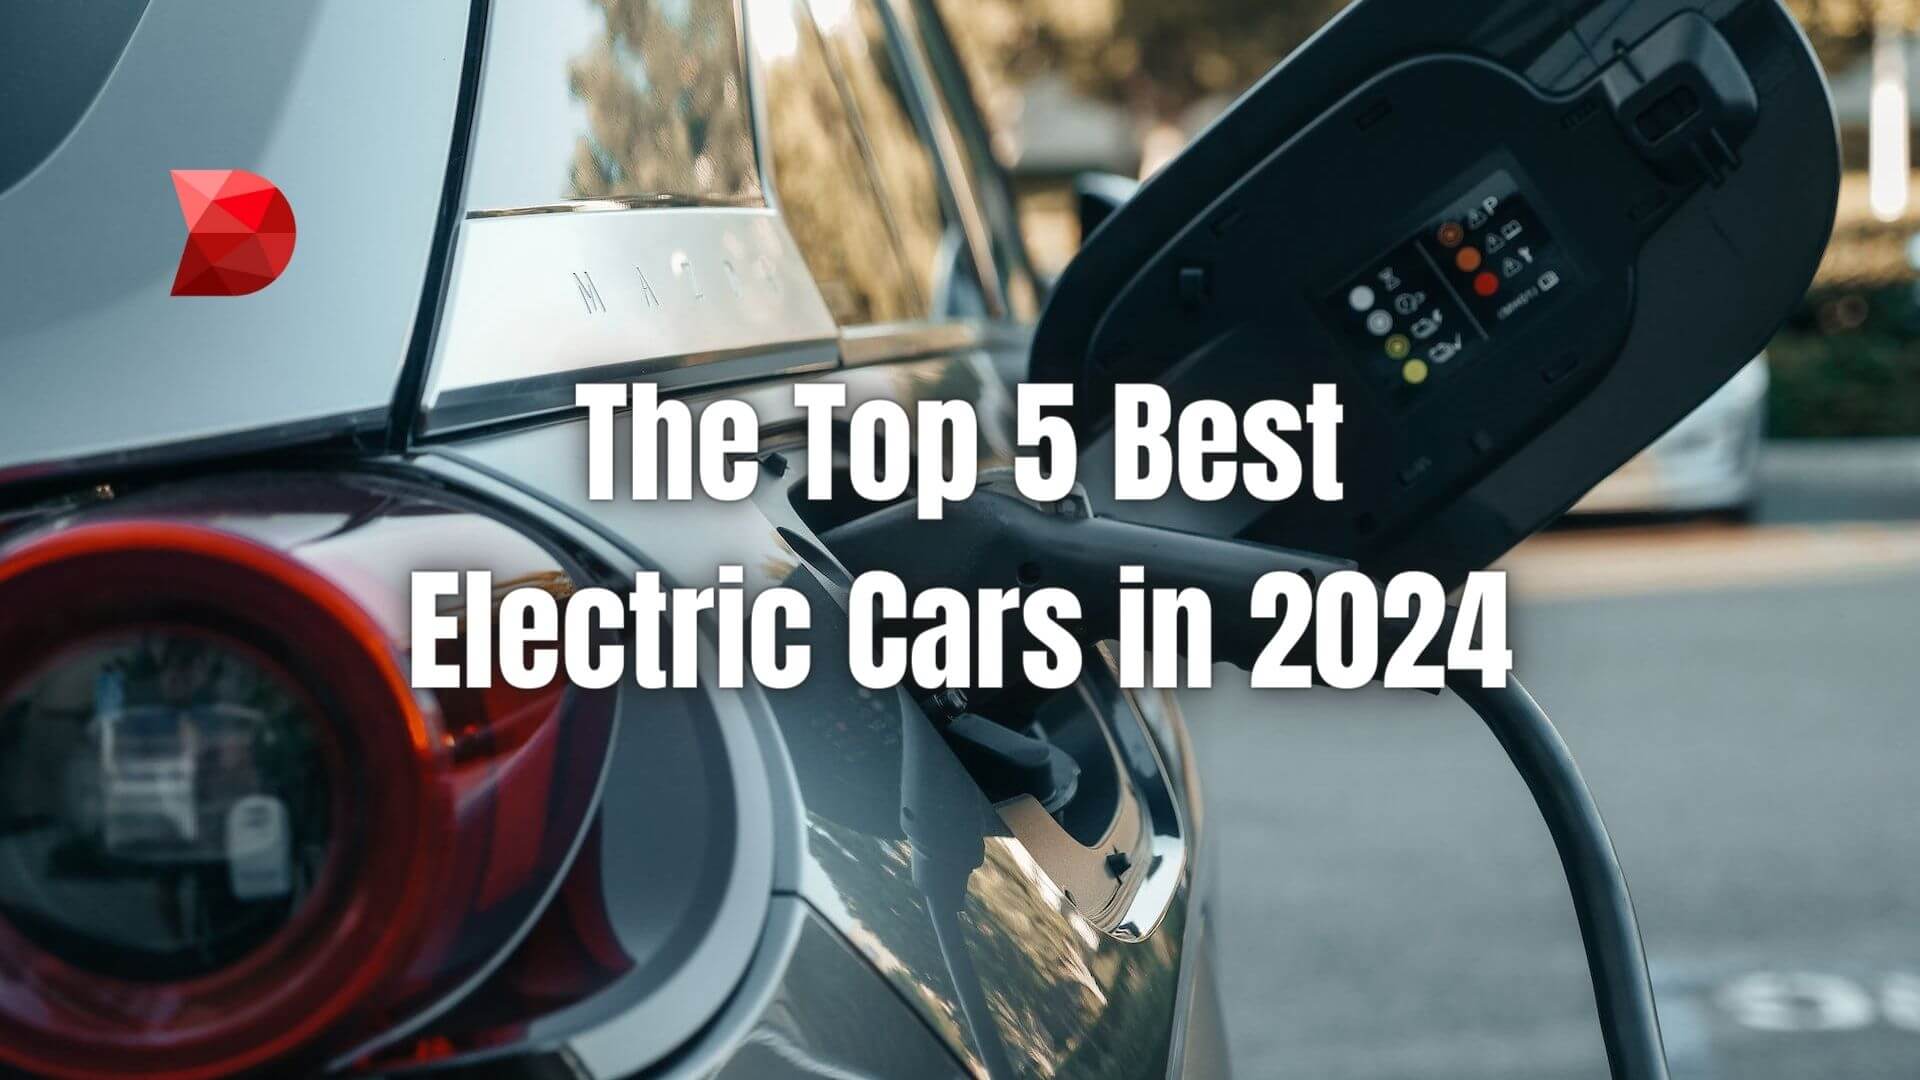 This article presents five of the best electric cars in 2024. From luxury to affordable sedans, there is something for everyone. Learn more!